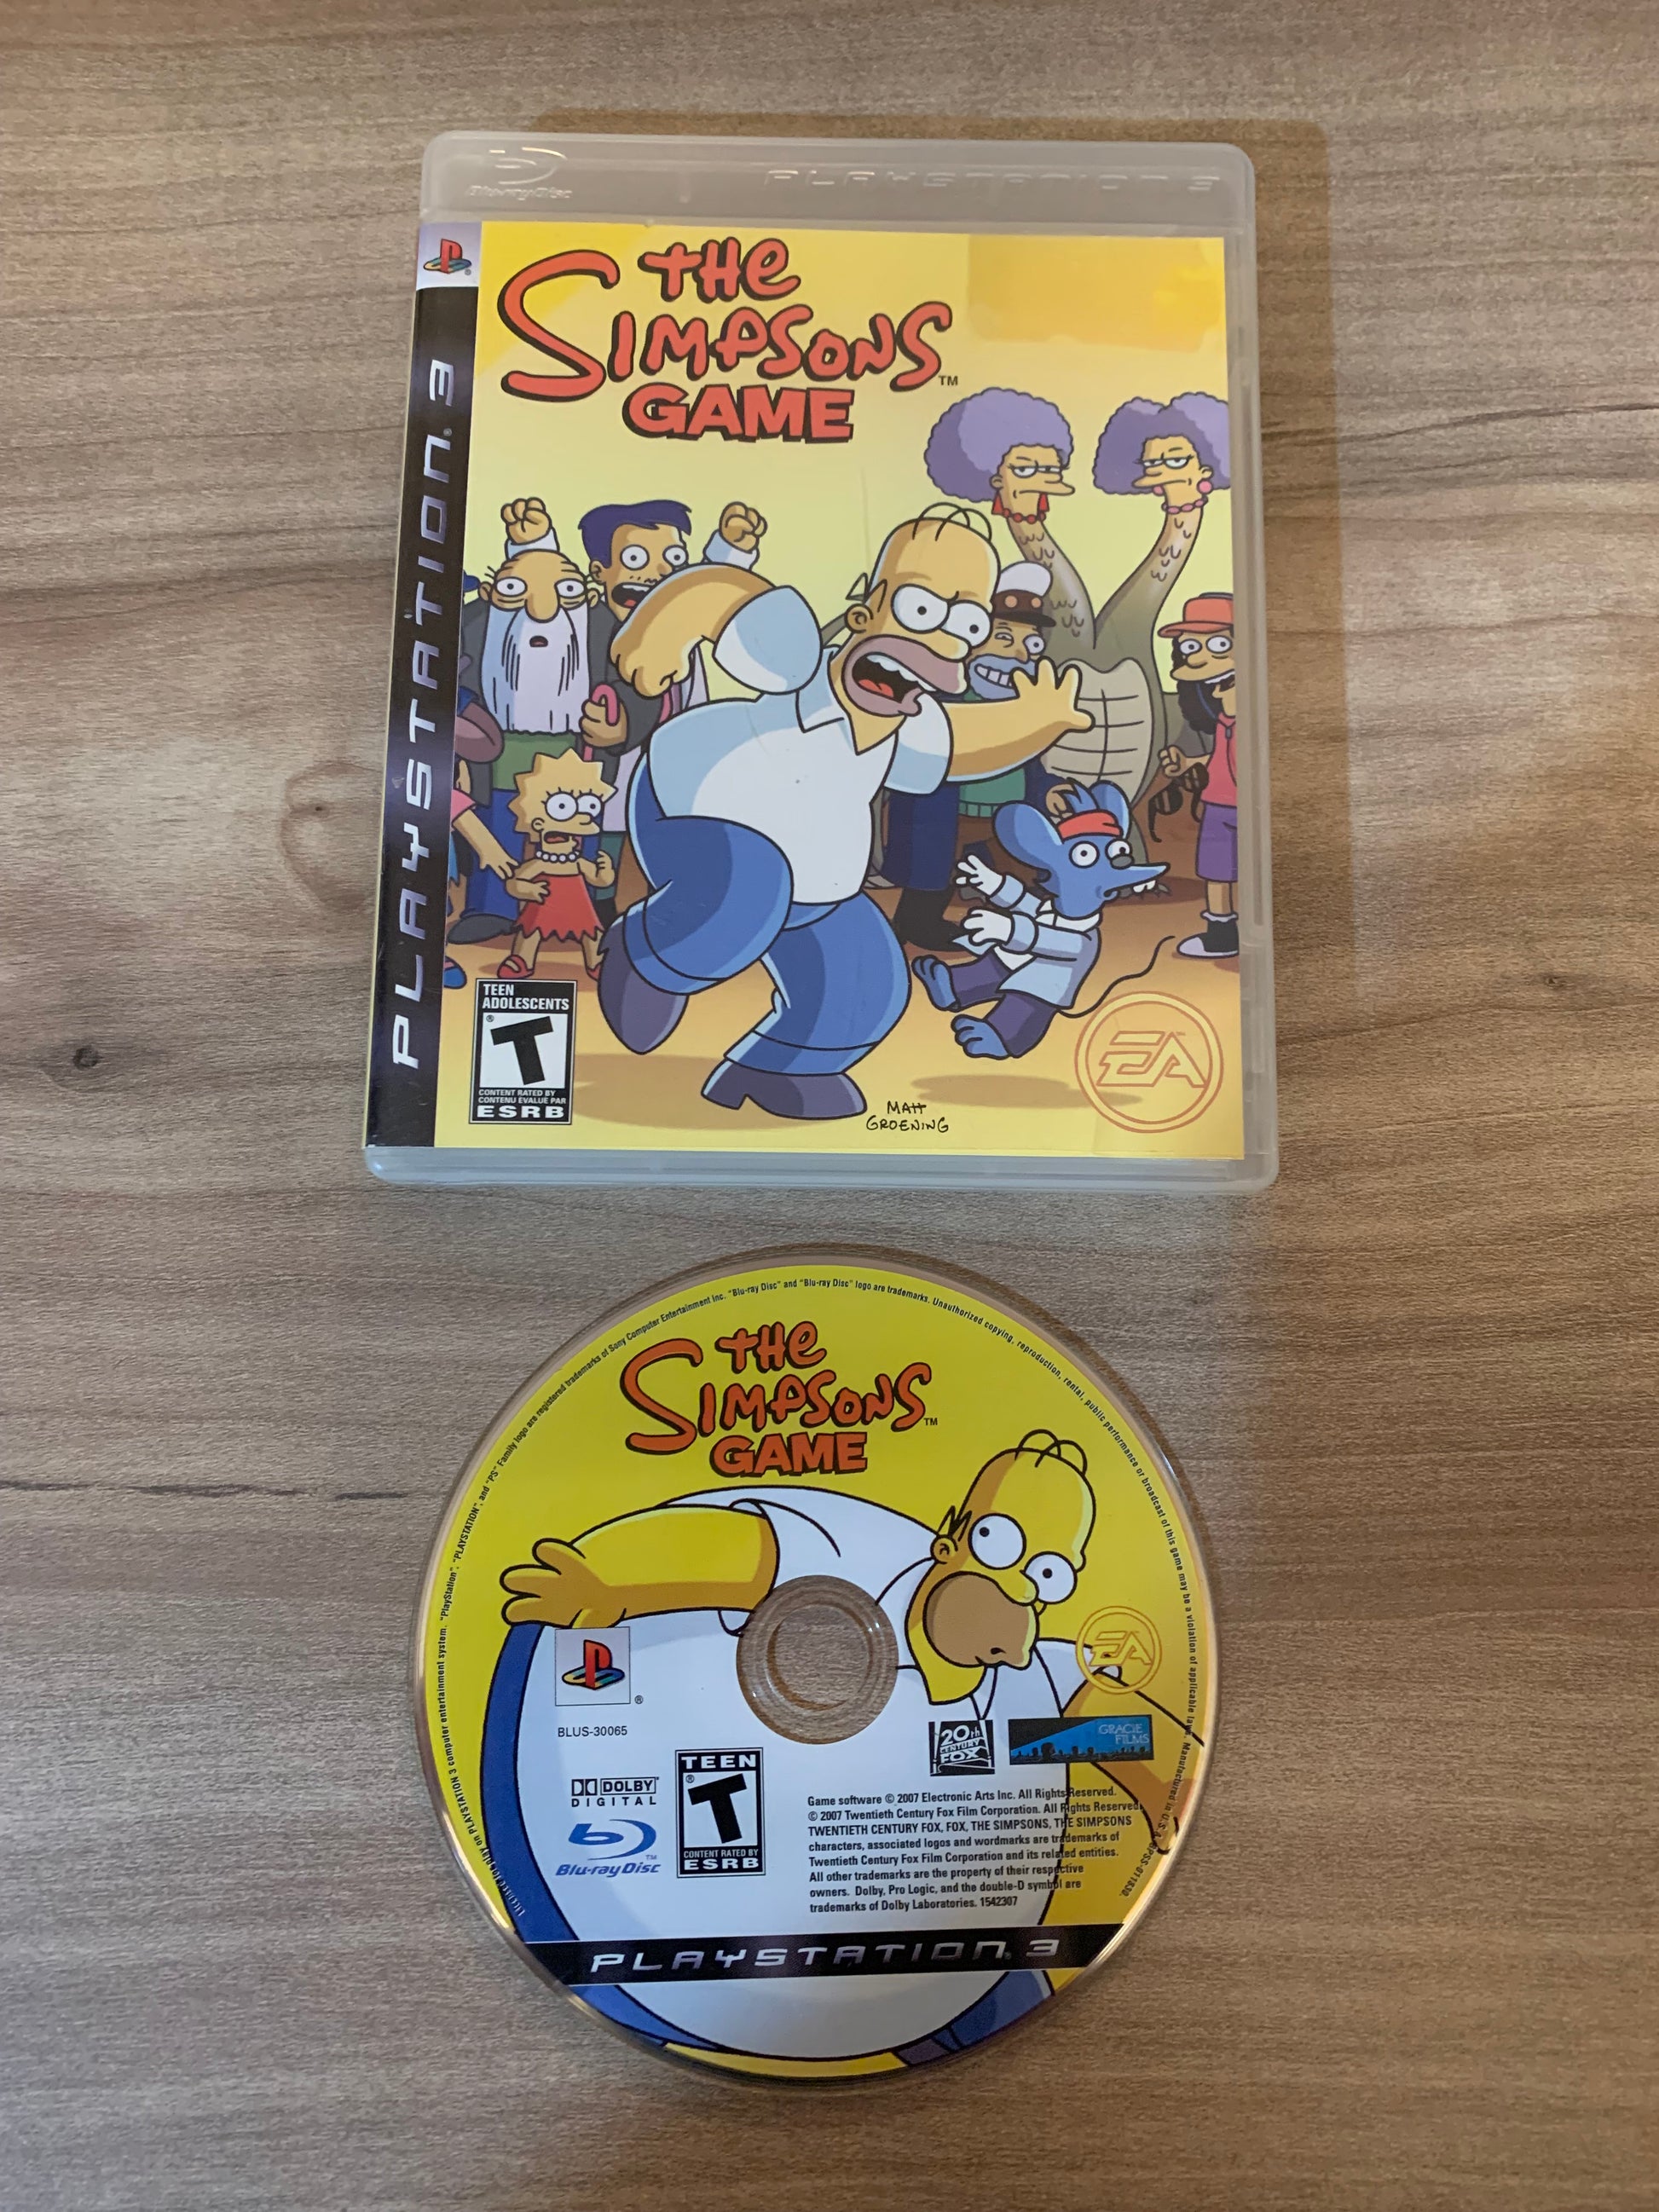 PiXEL-RETRO.COM : SONY PLAYSTATION 3 (PS3) COMPLET CIB BOX MANUAL GAME NTSC THE SIMPSONS GAME